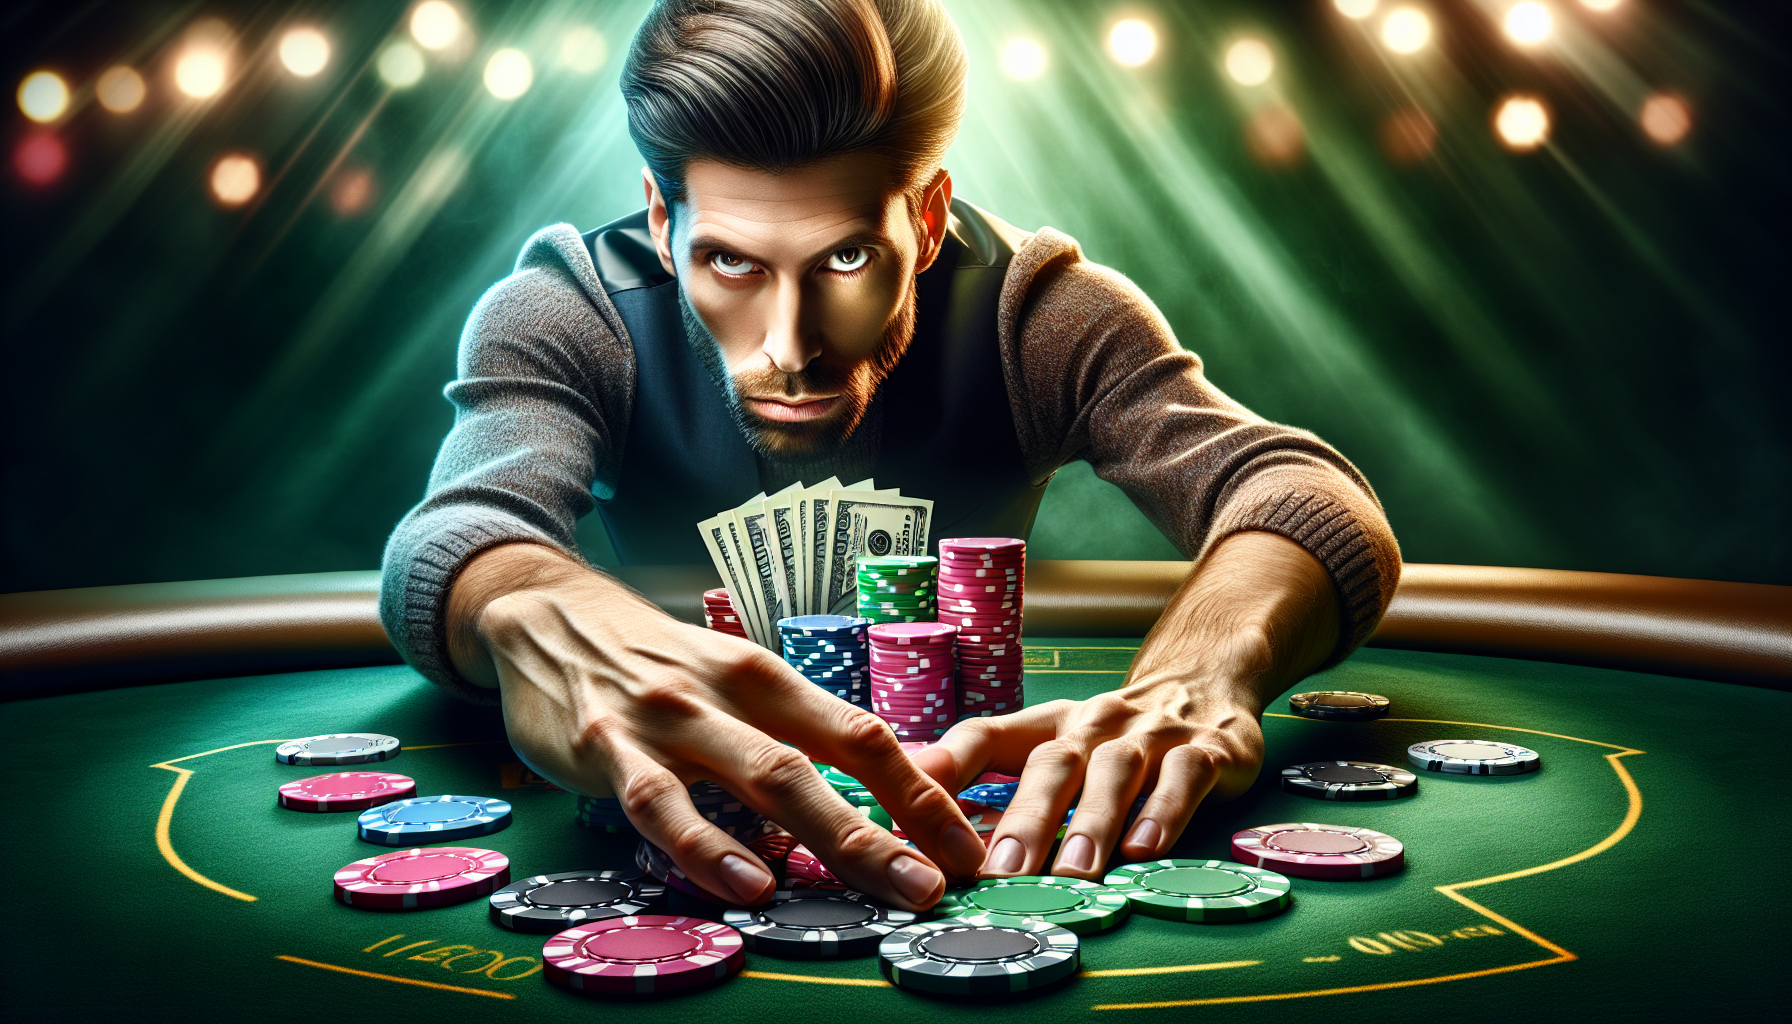 Illustration of a person managing casino chips and money